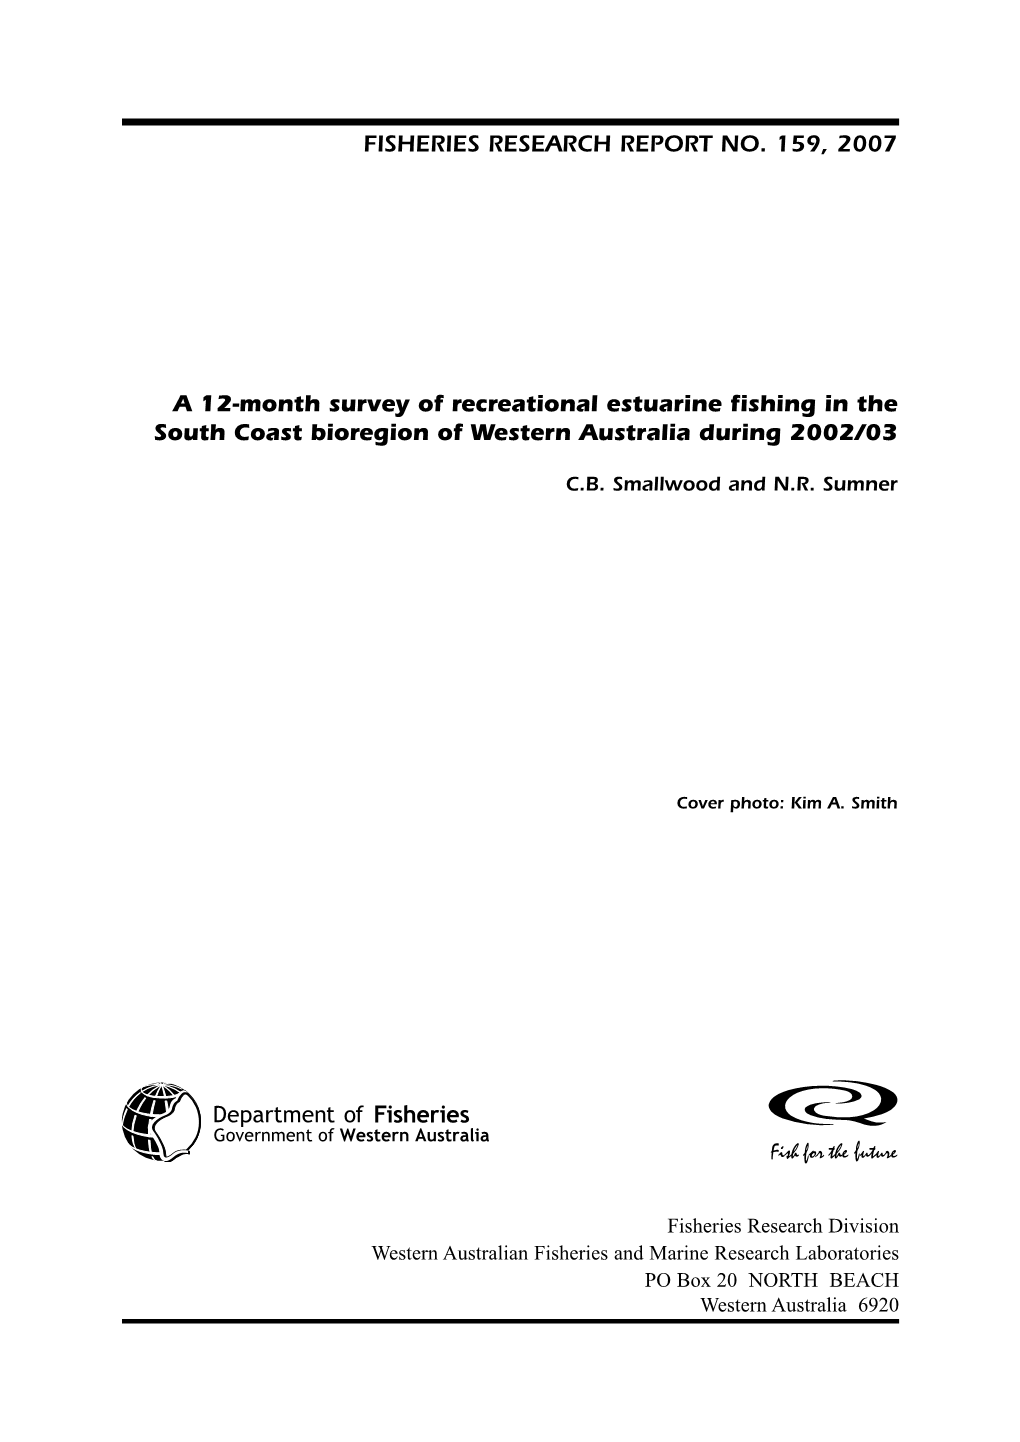 A 12-Month Survey of Recreational Estuarine Fishing in the South Coast Bioregion of Western Australia During 2002/03